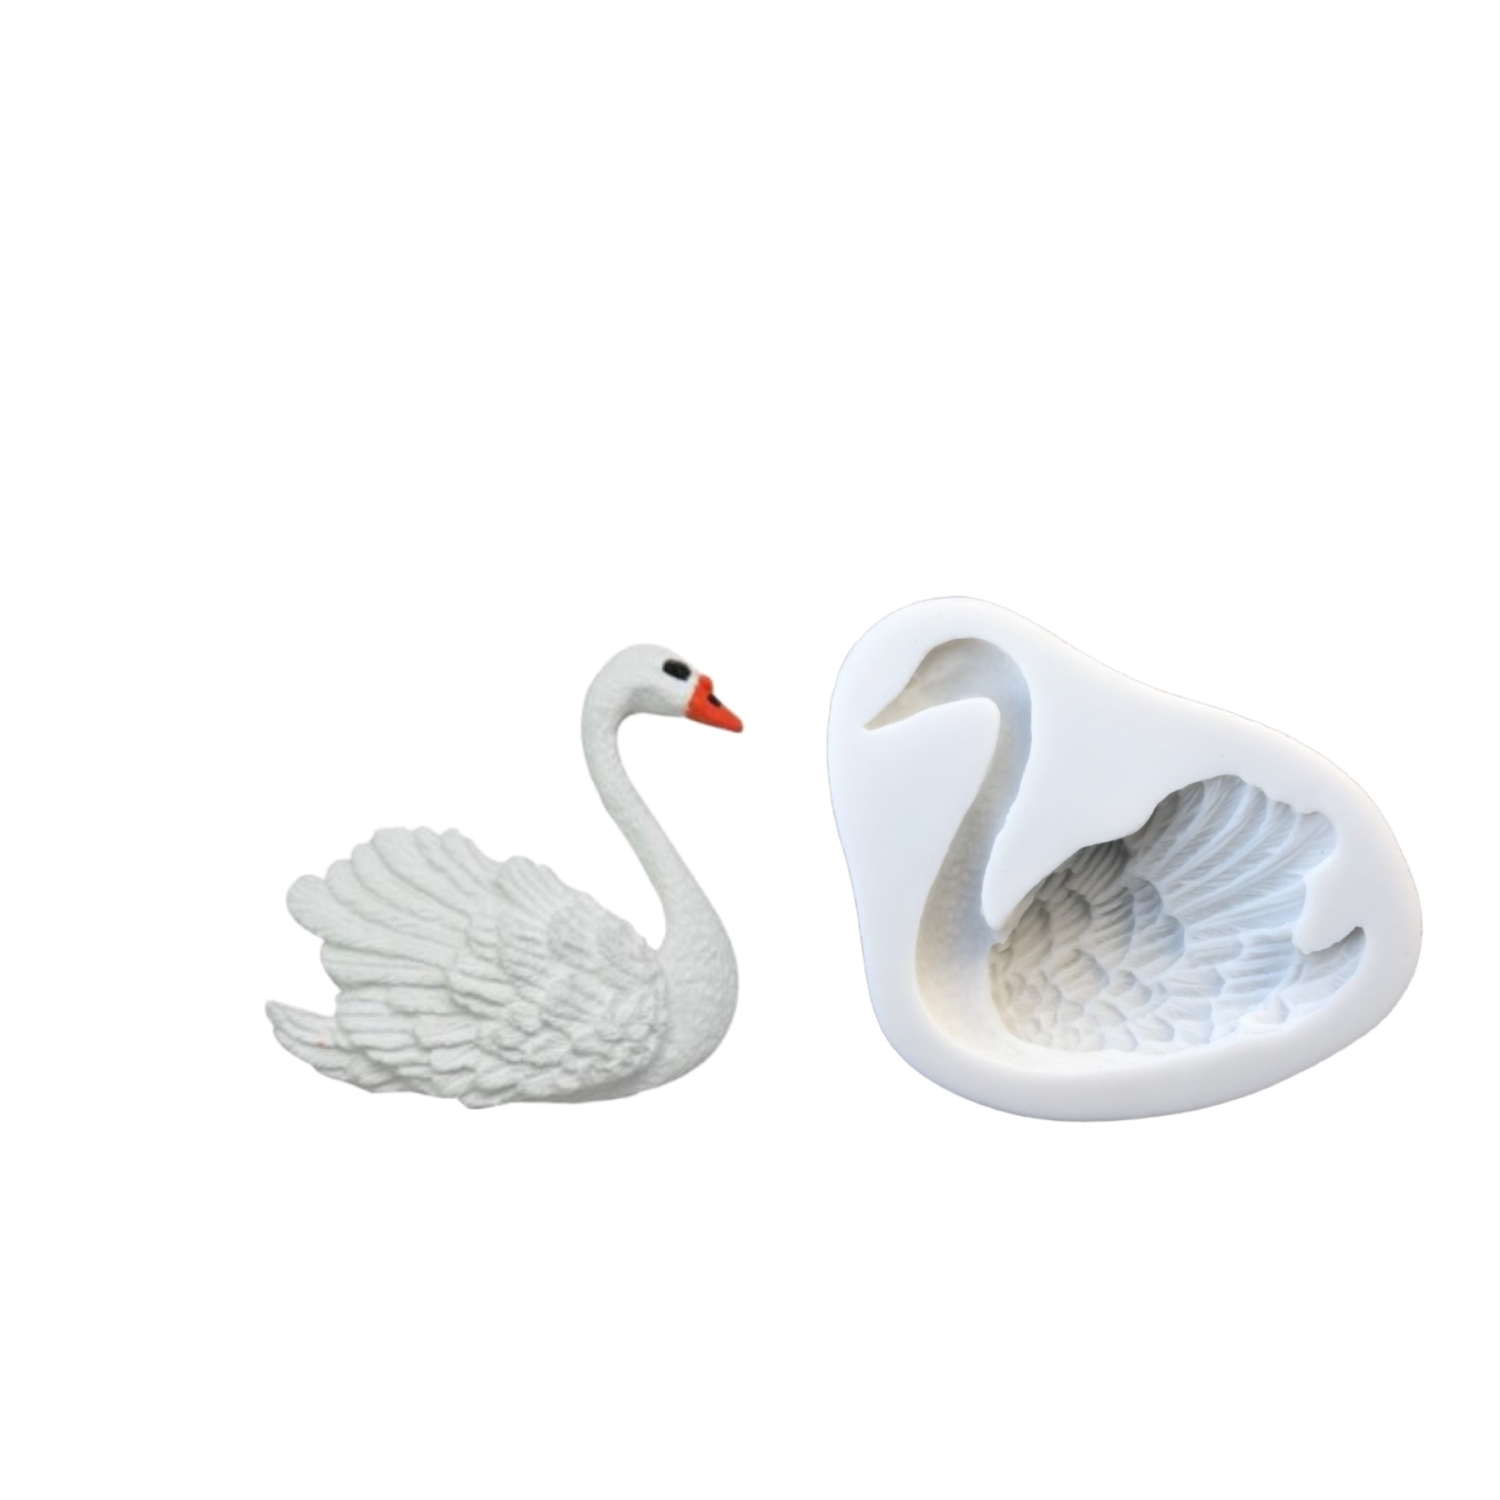 https://jykcakes.com/wp-content/uploads/2020/08/Swan-3D-Silicone-cake-Mold-SET.png